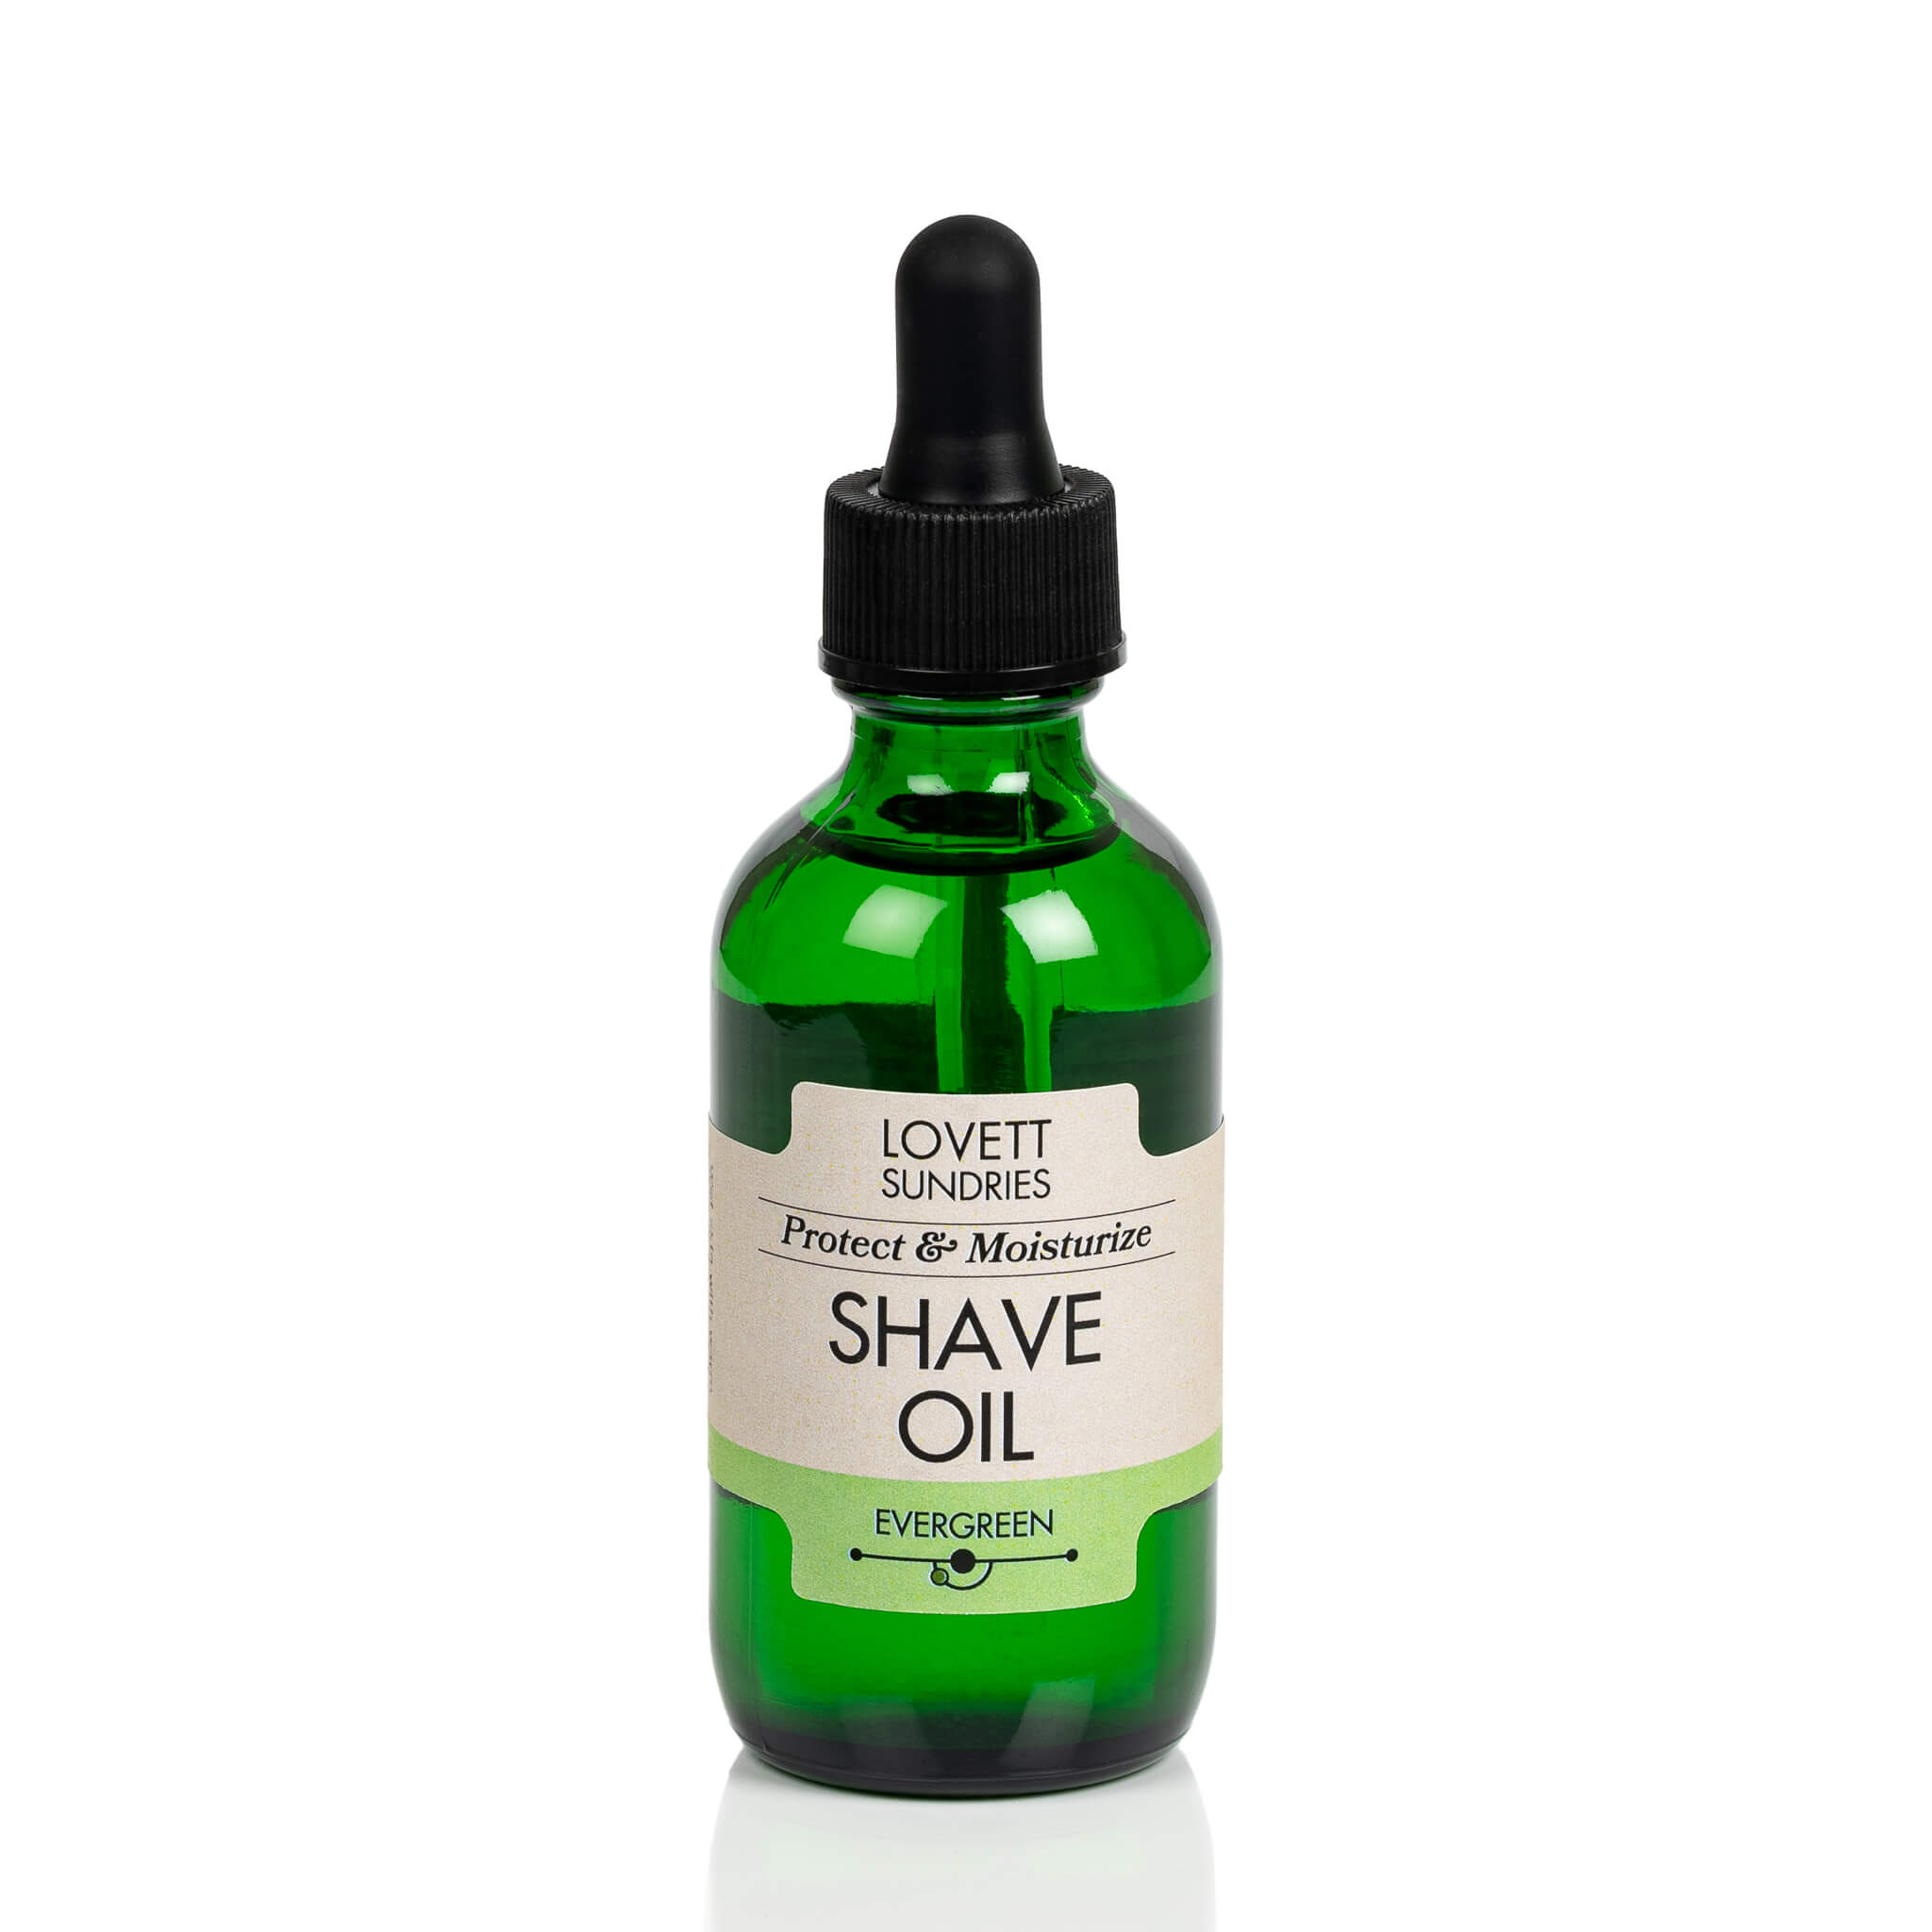 All natural moisturizing and protective evergreen scented shave oil in a green glass bottle with a dropper. 